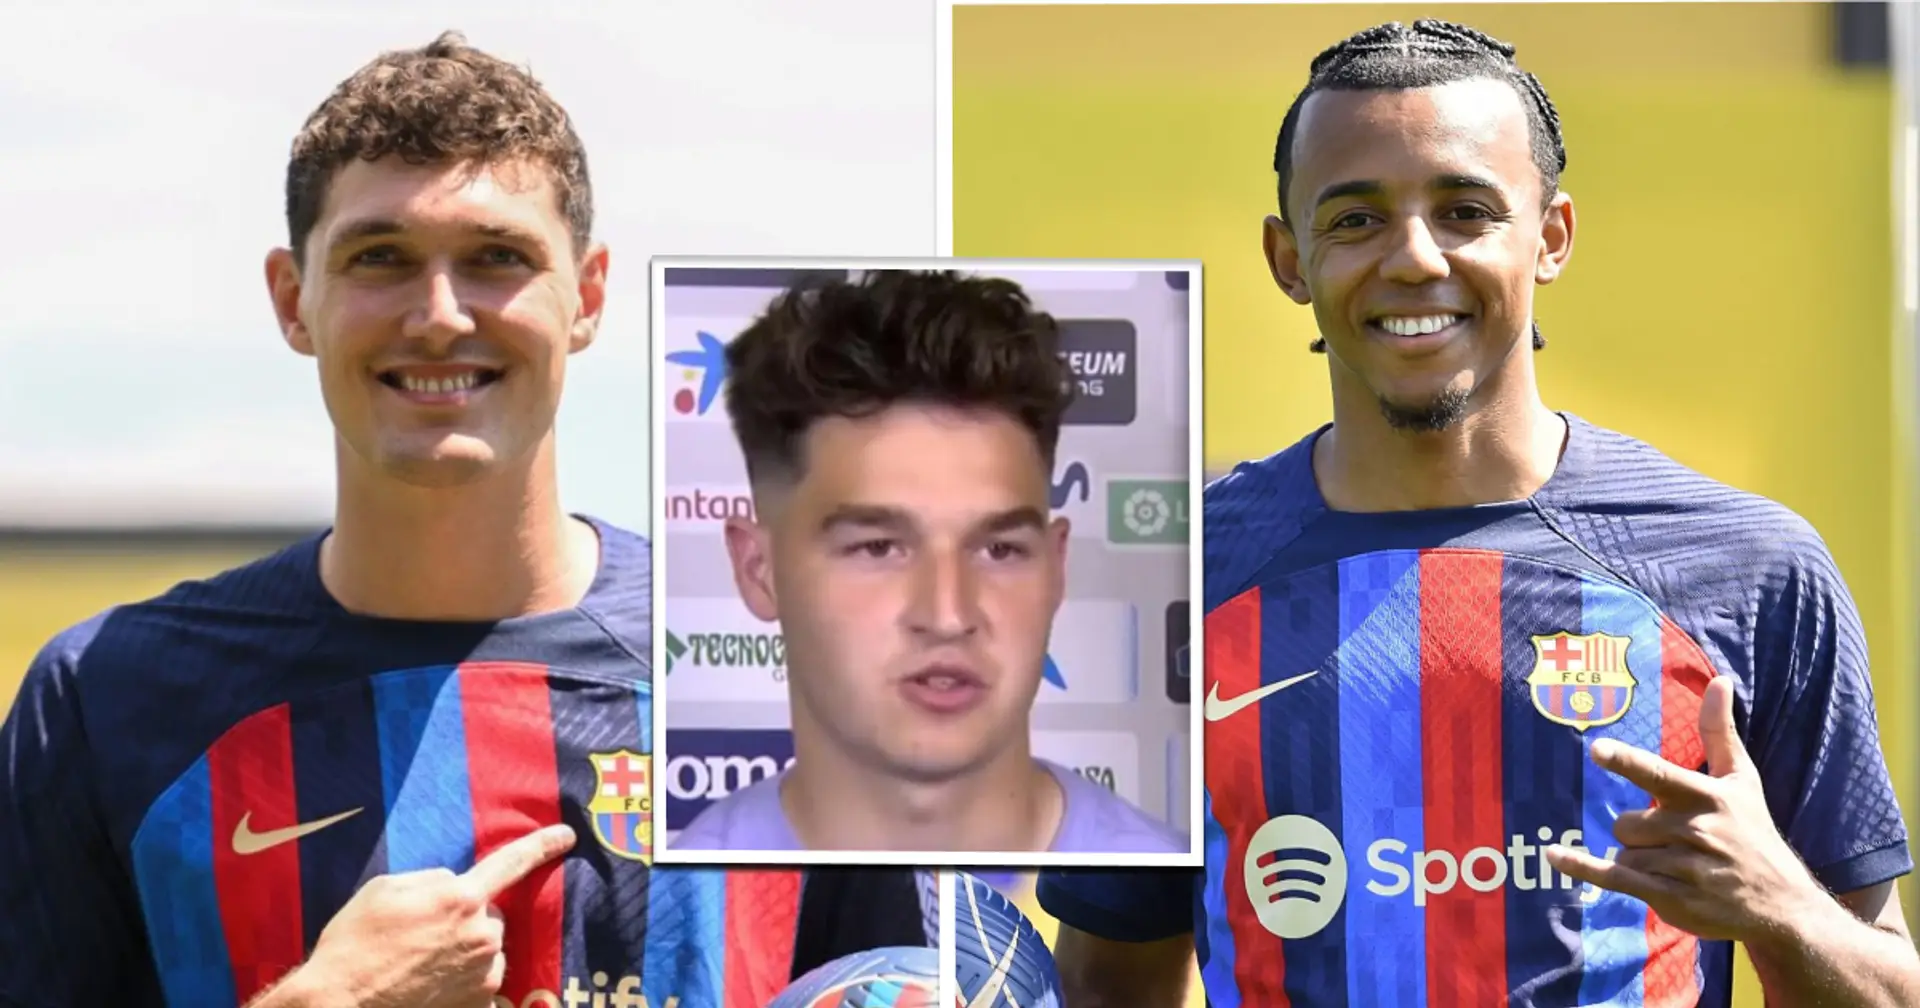 Barca 'prepared to sell' young promising centre-back after signing Kounde and Christensen